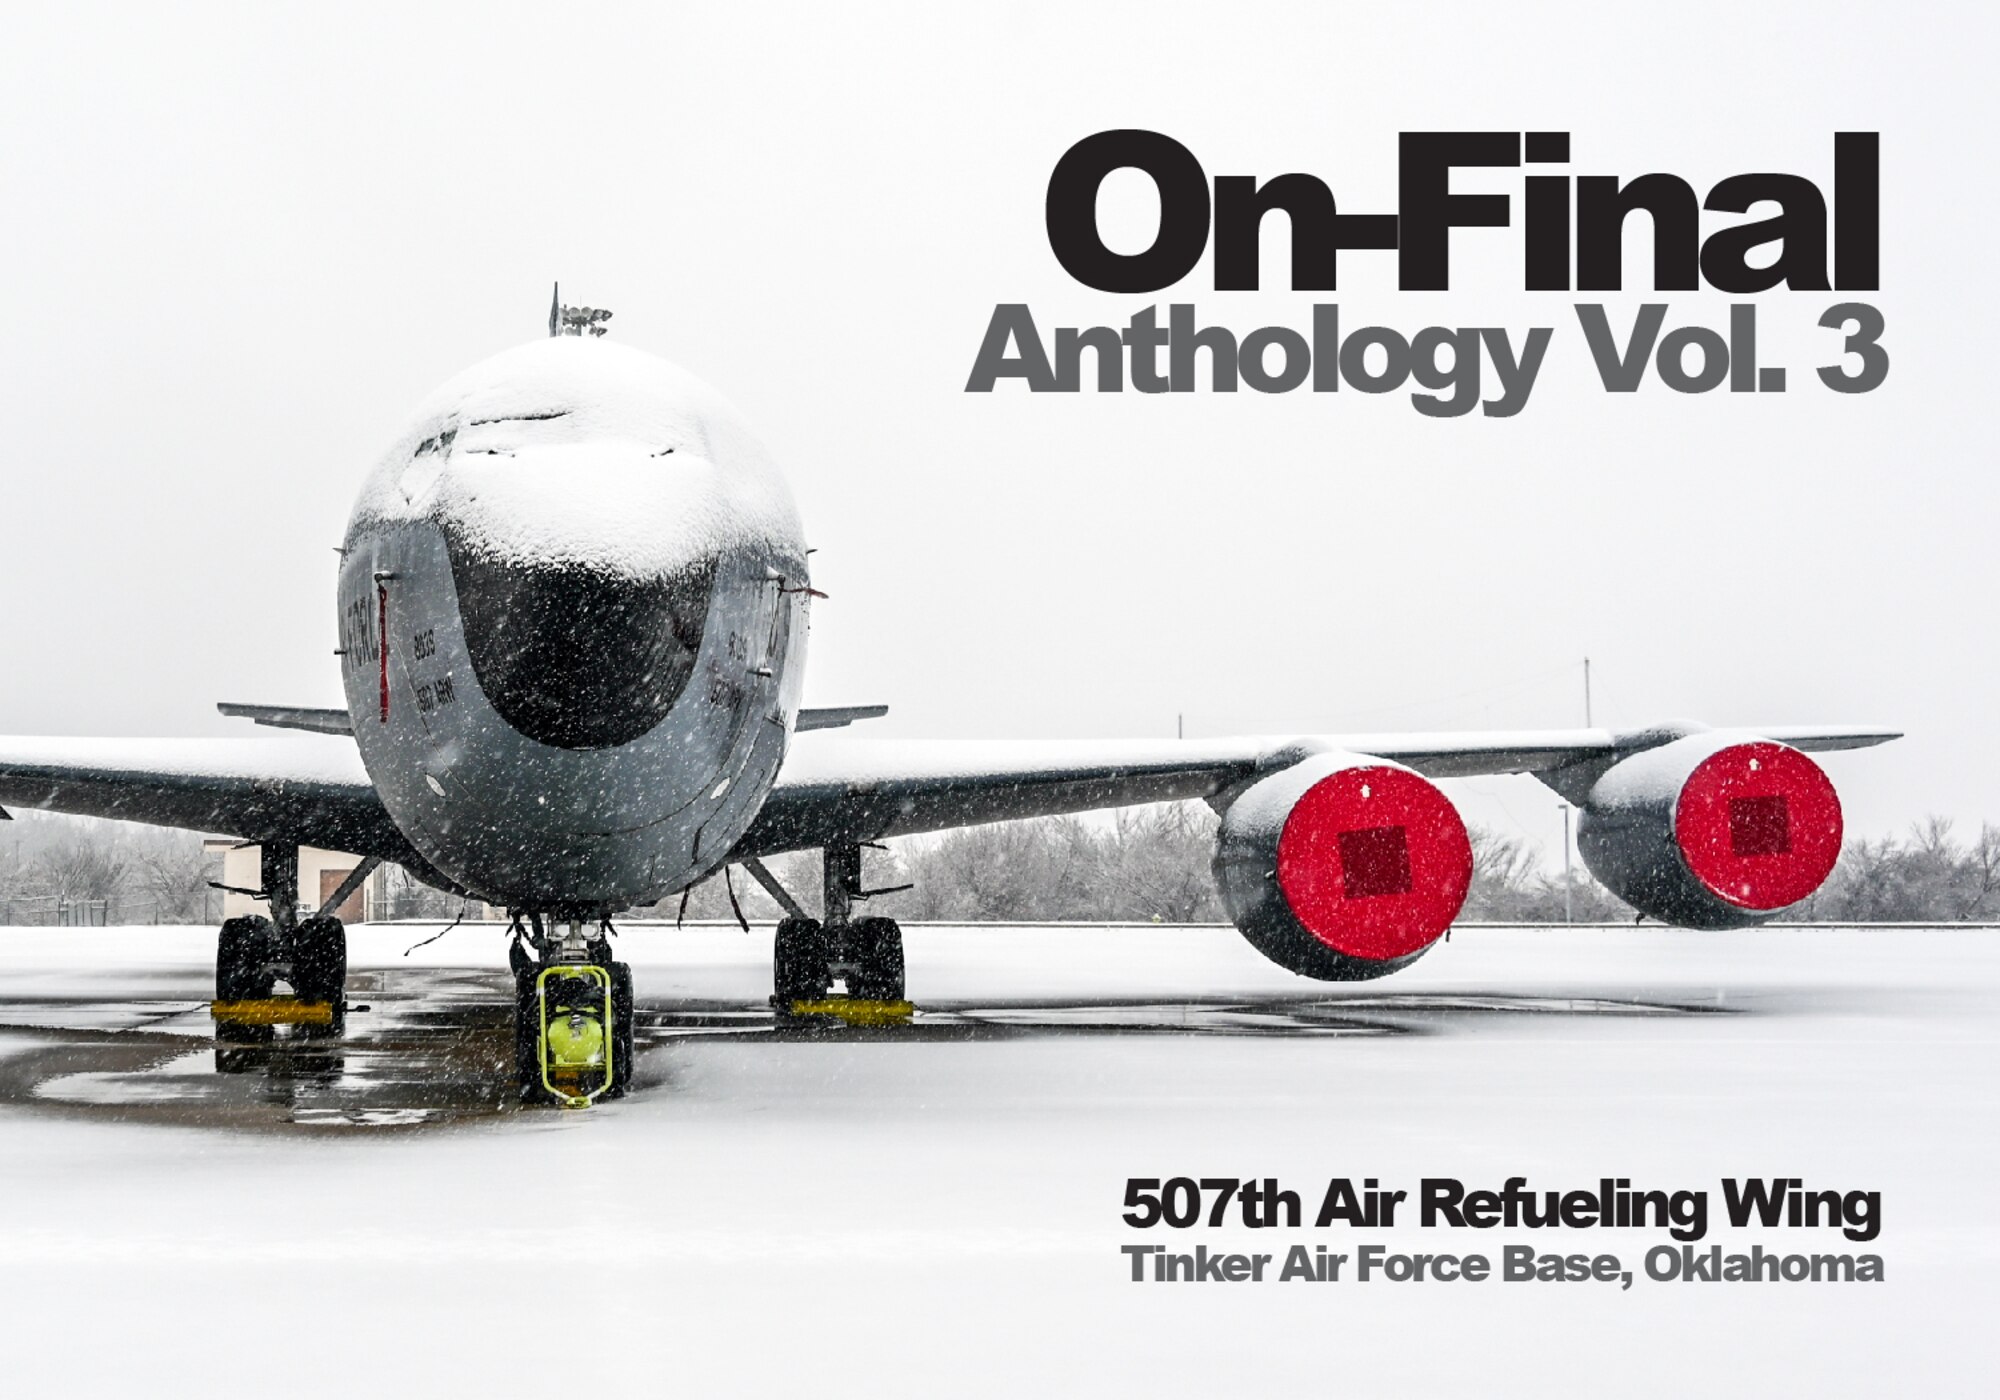 The On-Final Anthology is a yearly official bulletin for the Airmen of the 507th Air Refueling Wing, an Air Force Reserve Command unit at Tinker Air Force Base, Oklahoma. The anthology highlights the amazing stories of Okies who make a difference everyday in the Air Force reserve and in their local communities.